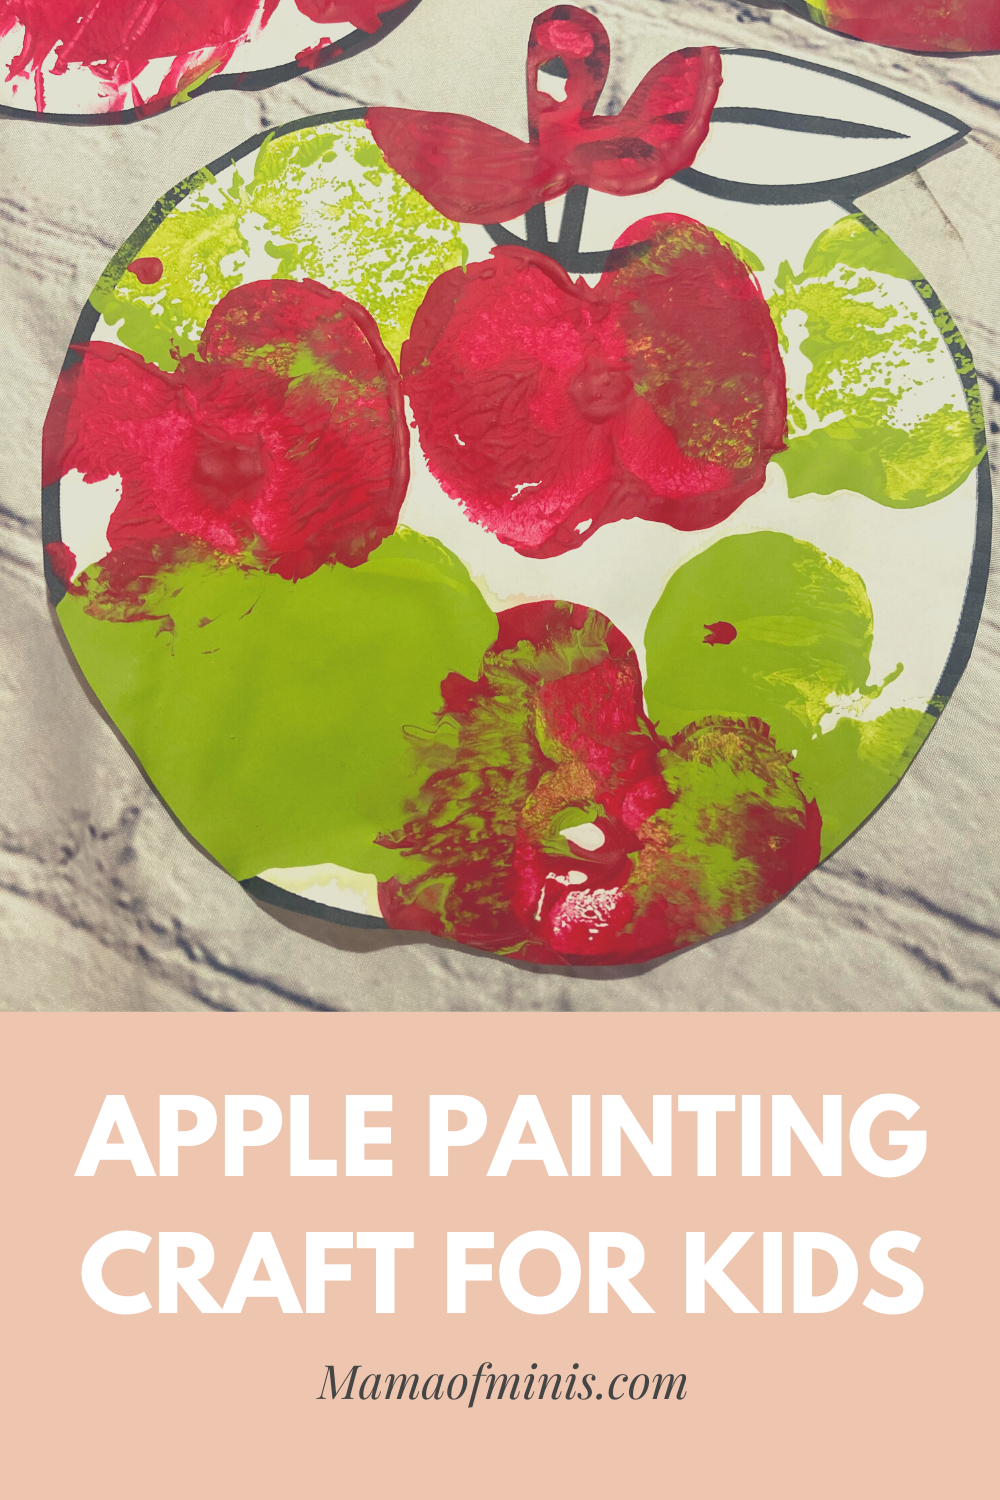 Apple Painting Craft for Kids